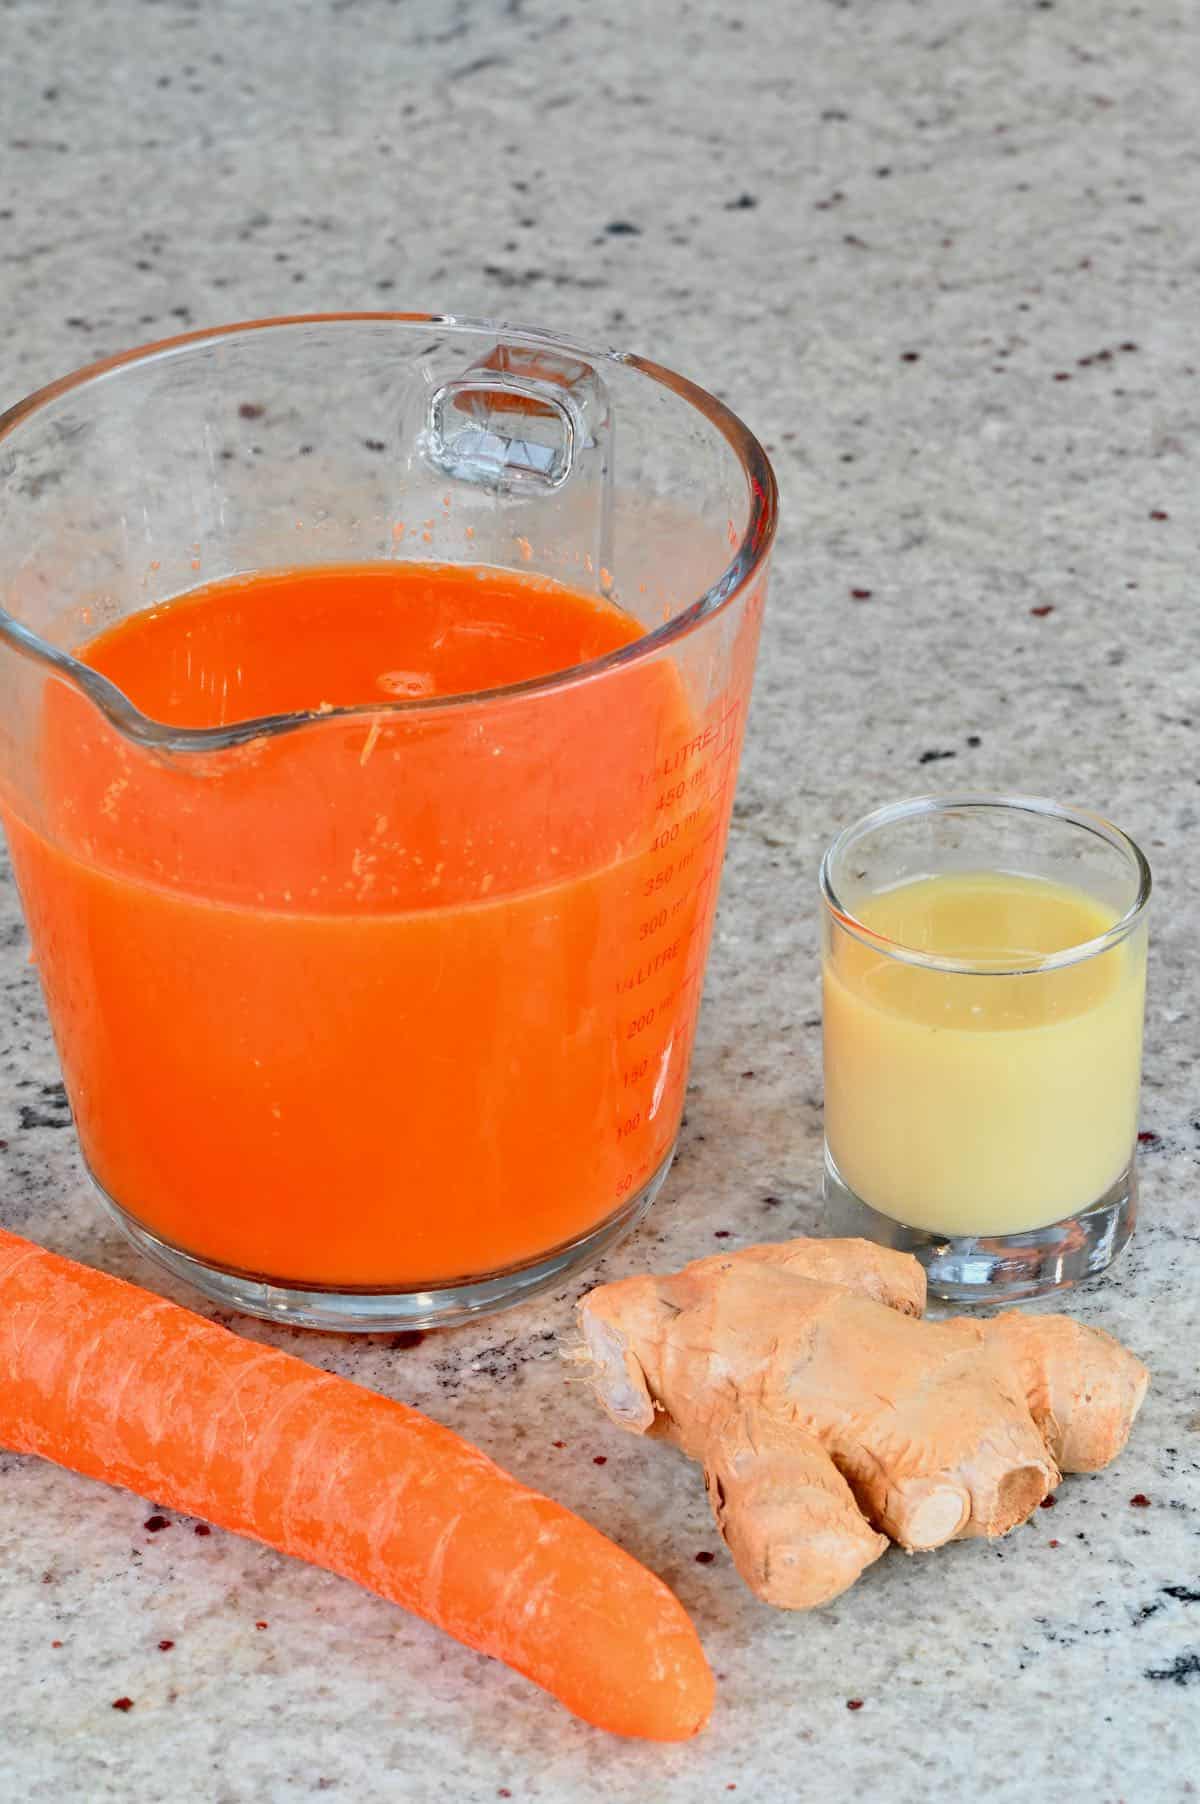 Carrot juice in a measuring cup and ginger juice in a small glass